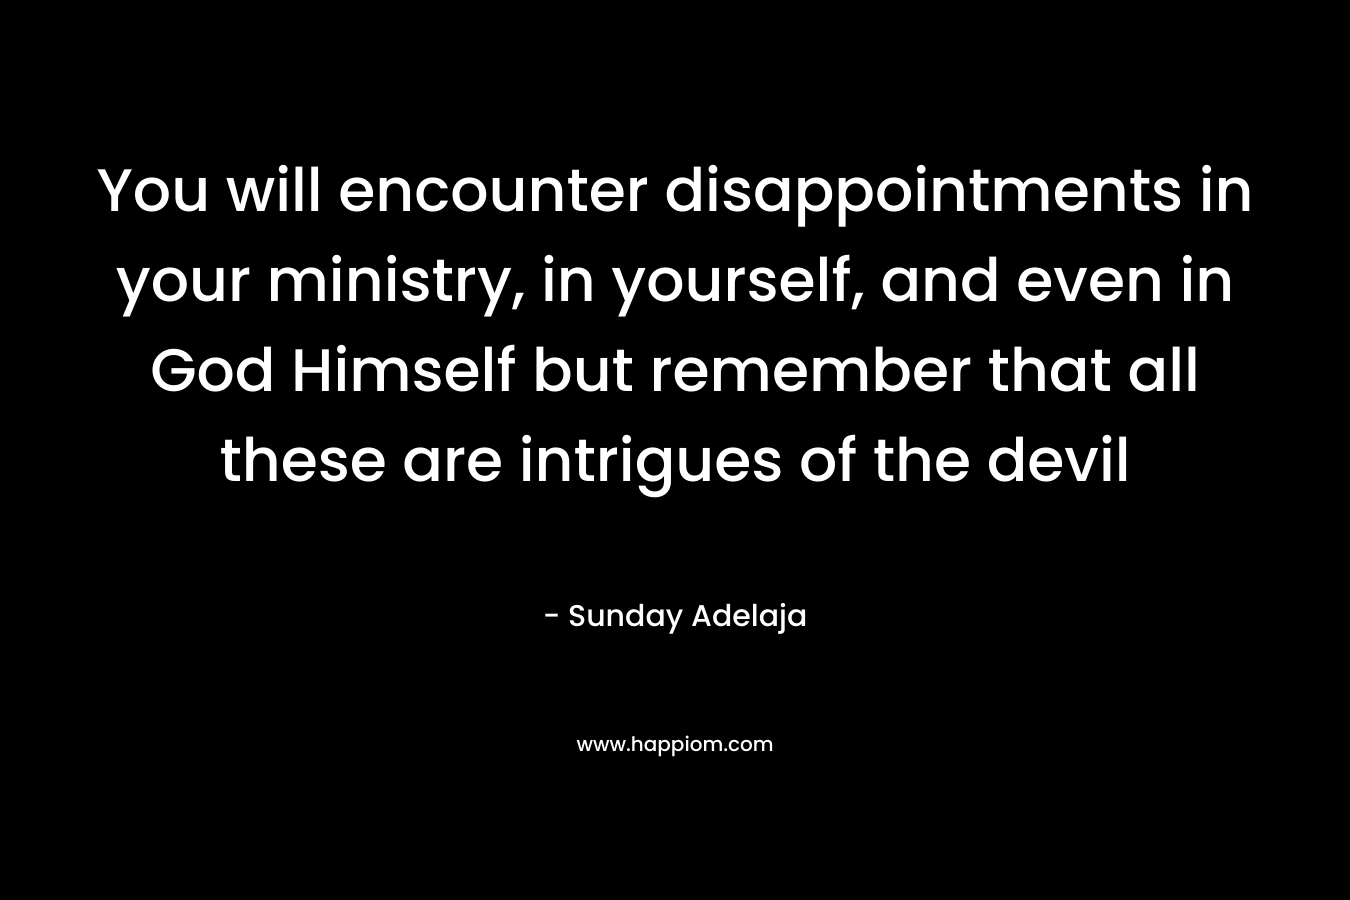 You will encounter disappointments in your ministry, in yourself, and even in God Himself but remember that all these are intrigues of the devil – Sunday Adelaja